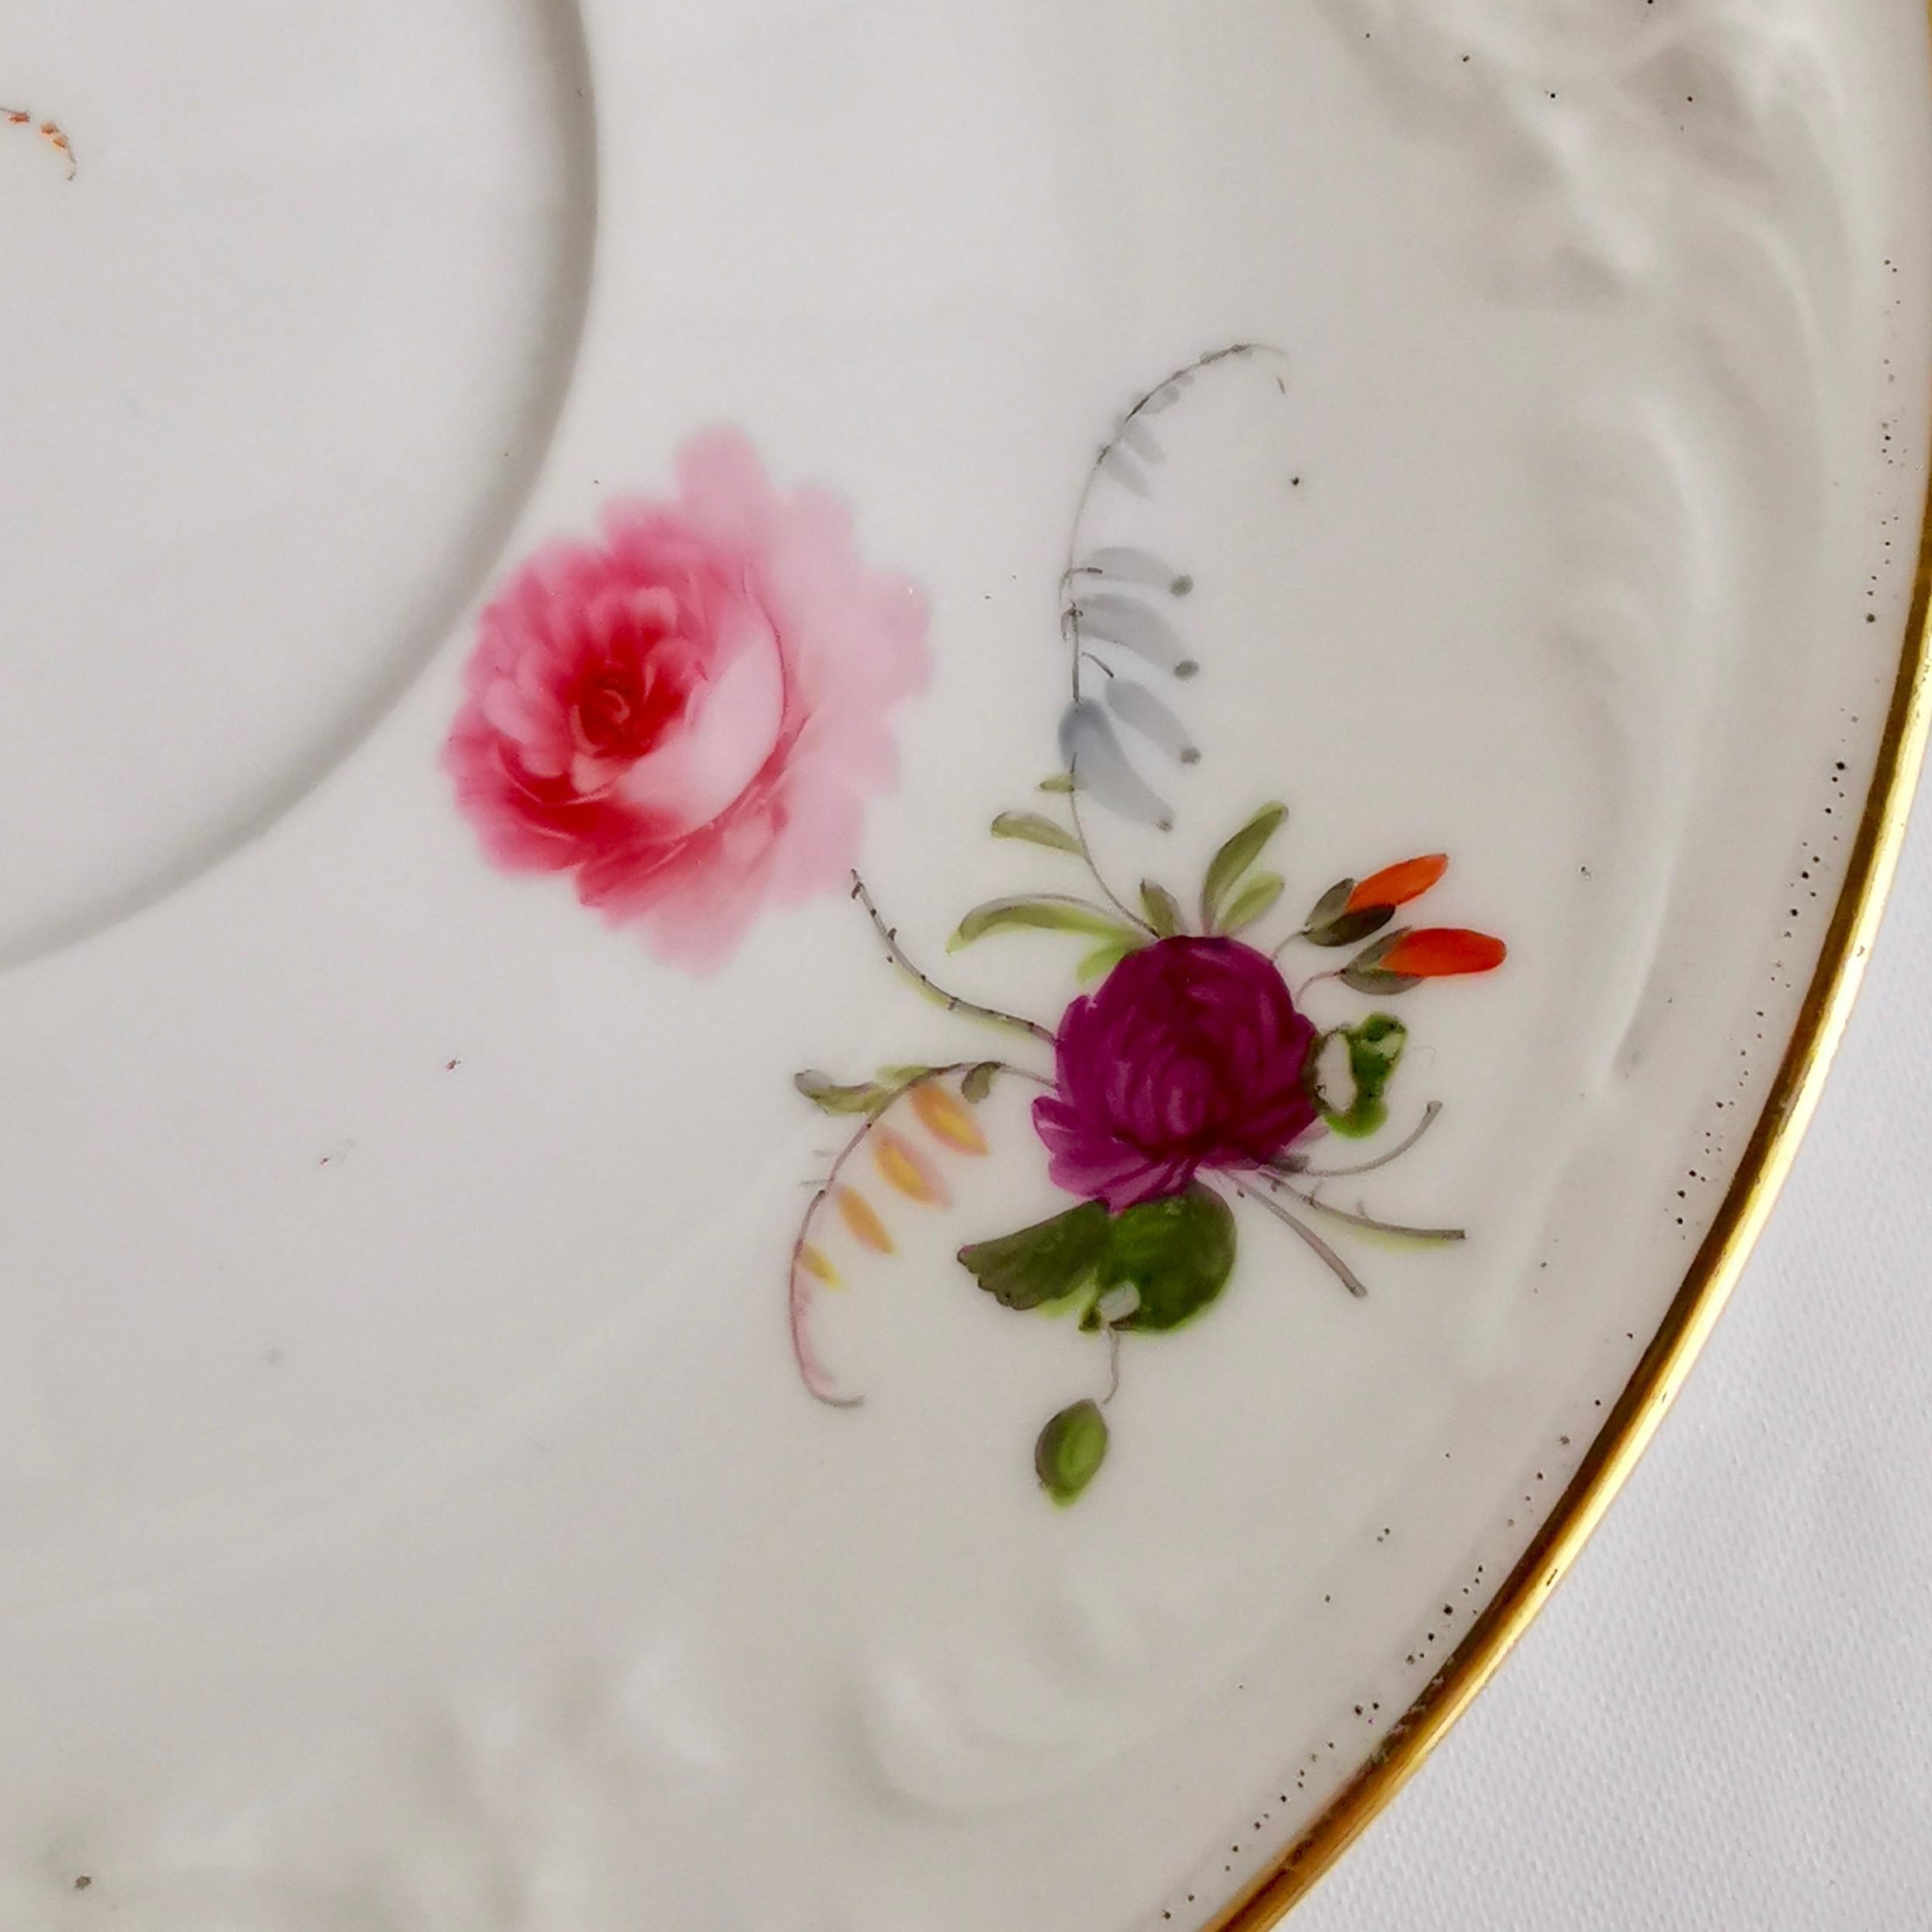 Davenport Porcelain Teacup, White with Hand Painted Flowers, circa 1820 3